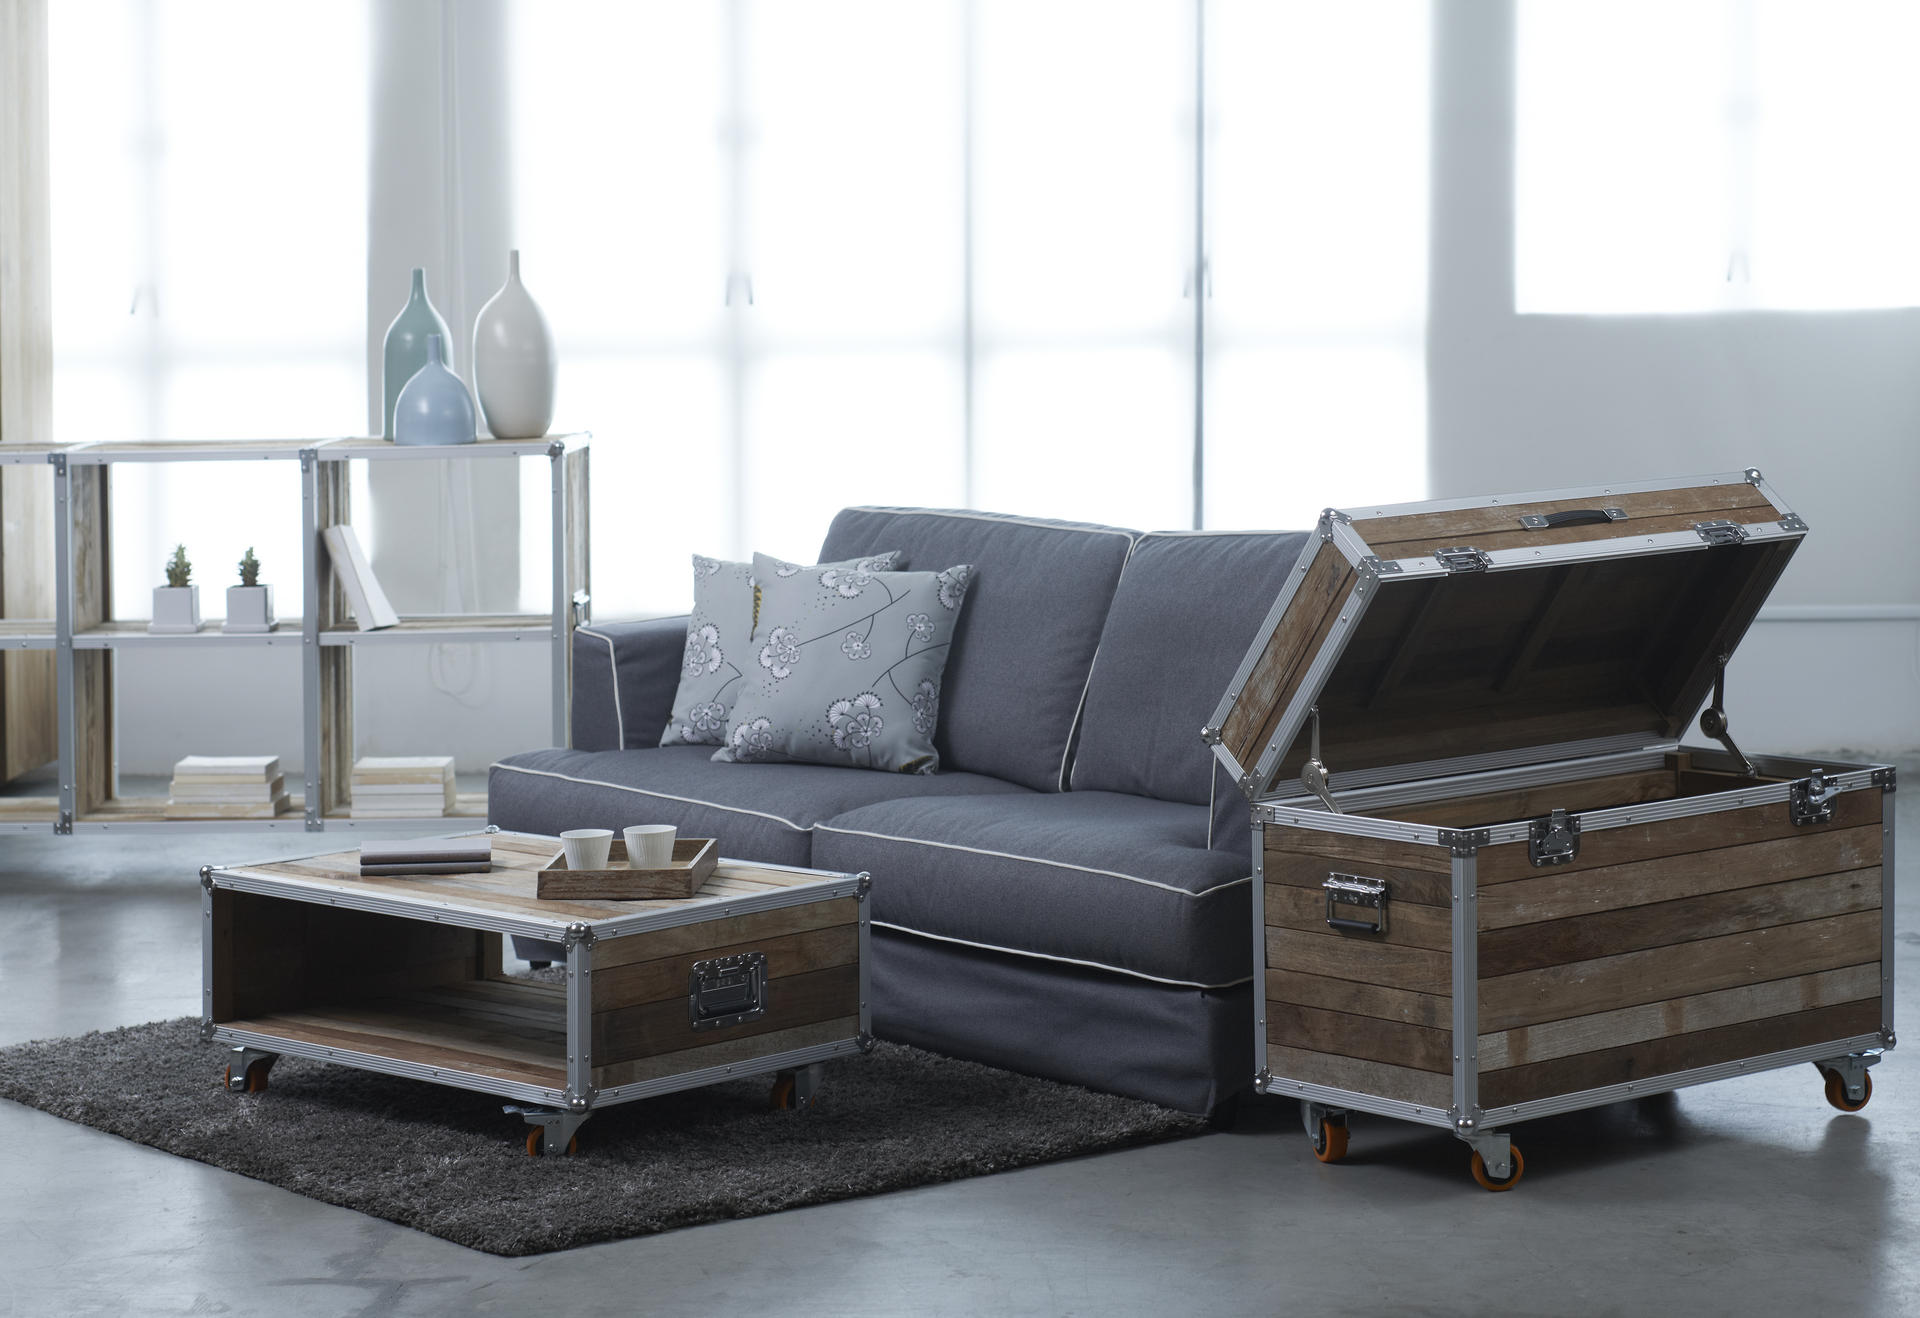 The Roadie collection features reclaimed wood and lockable wheels.